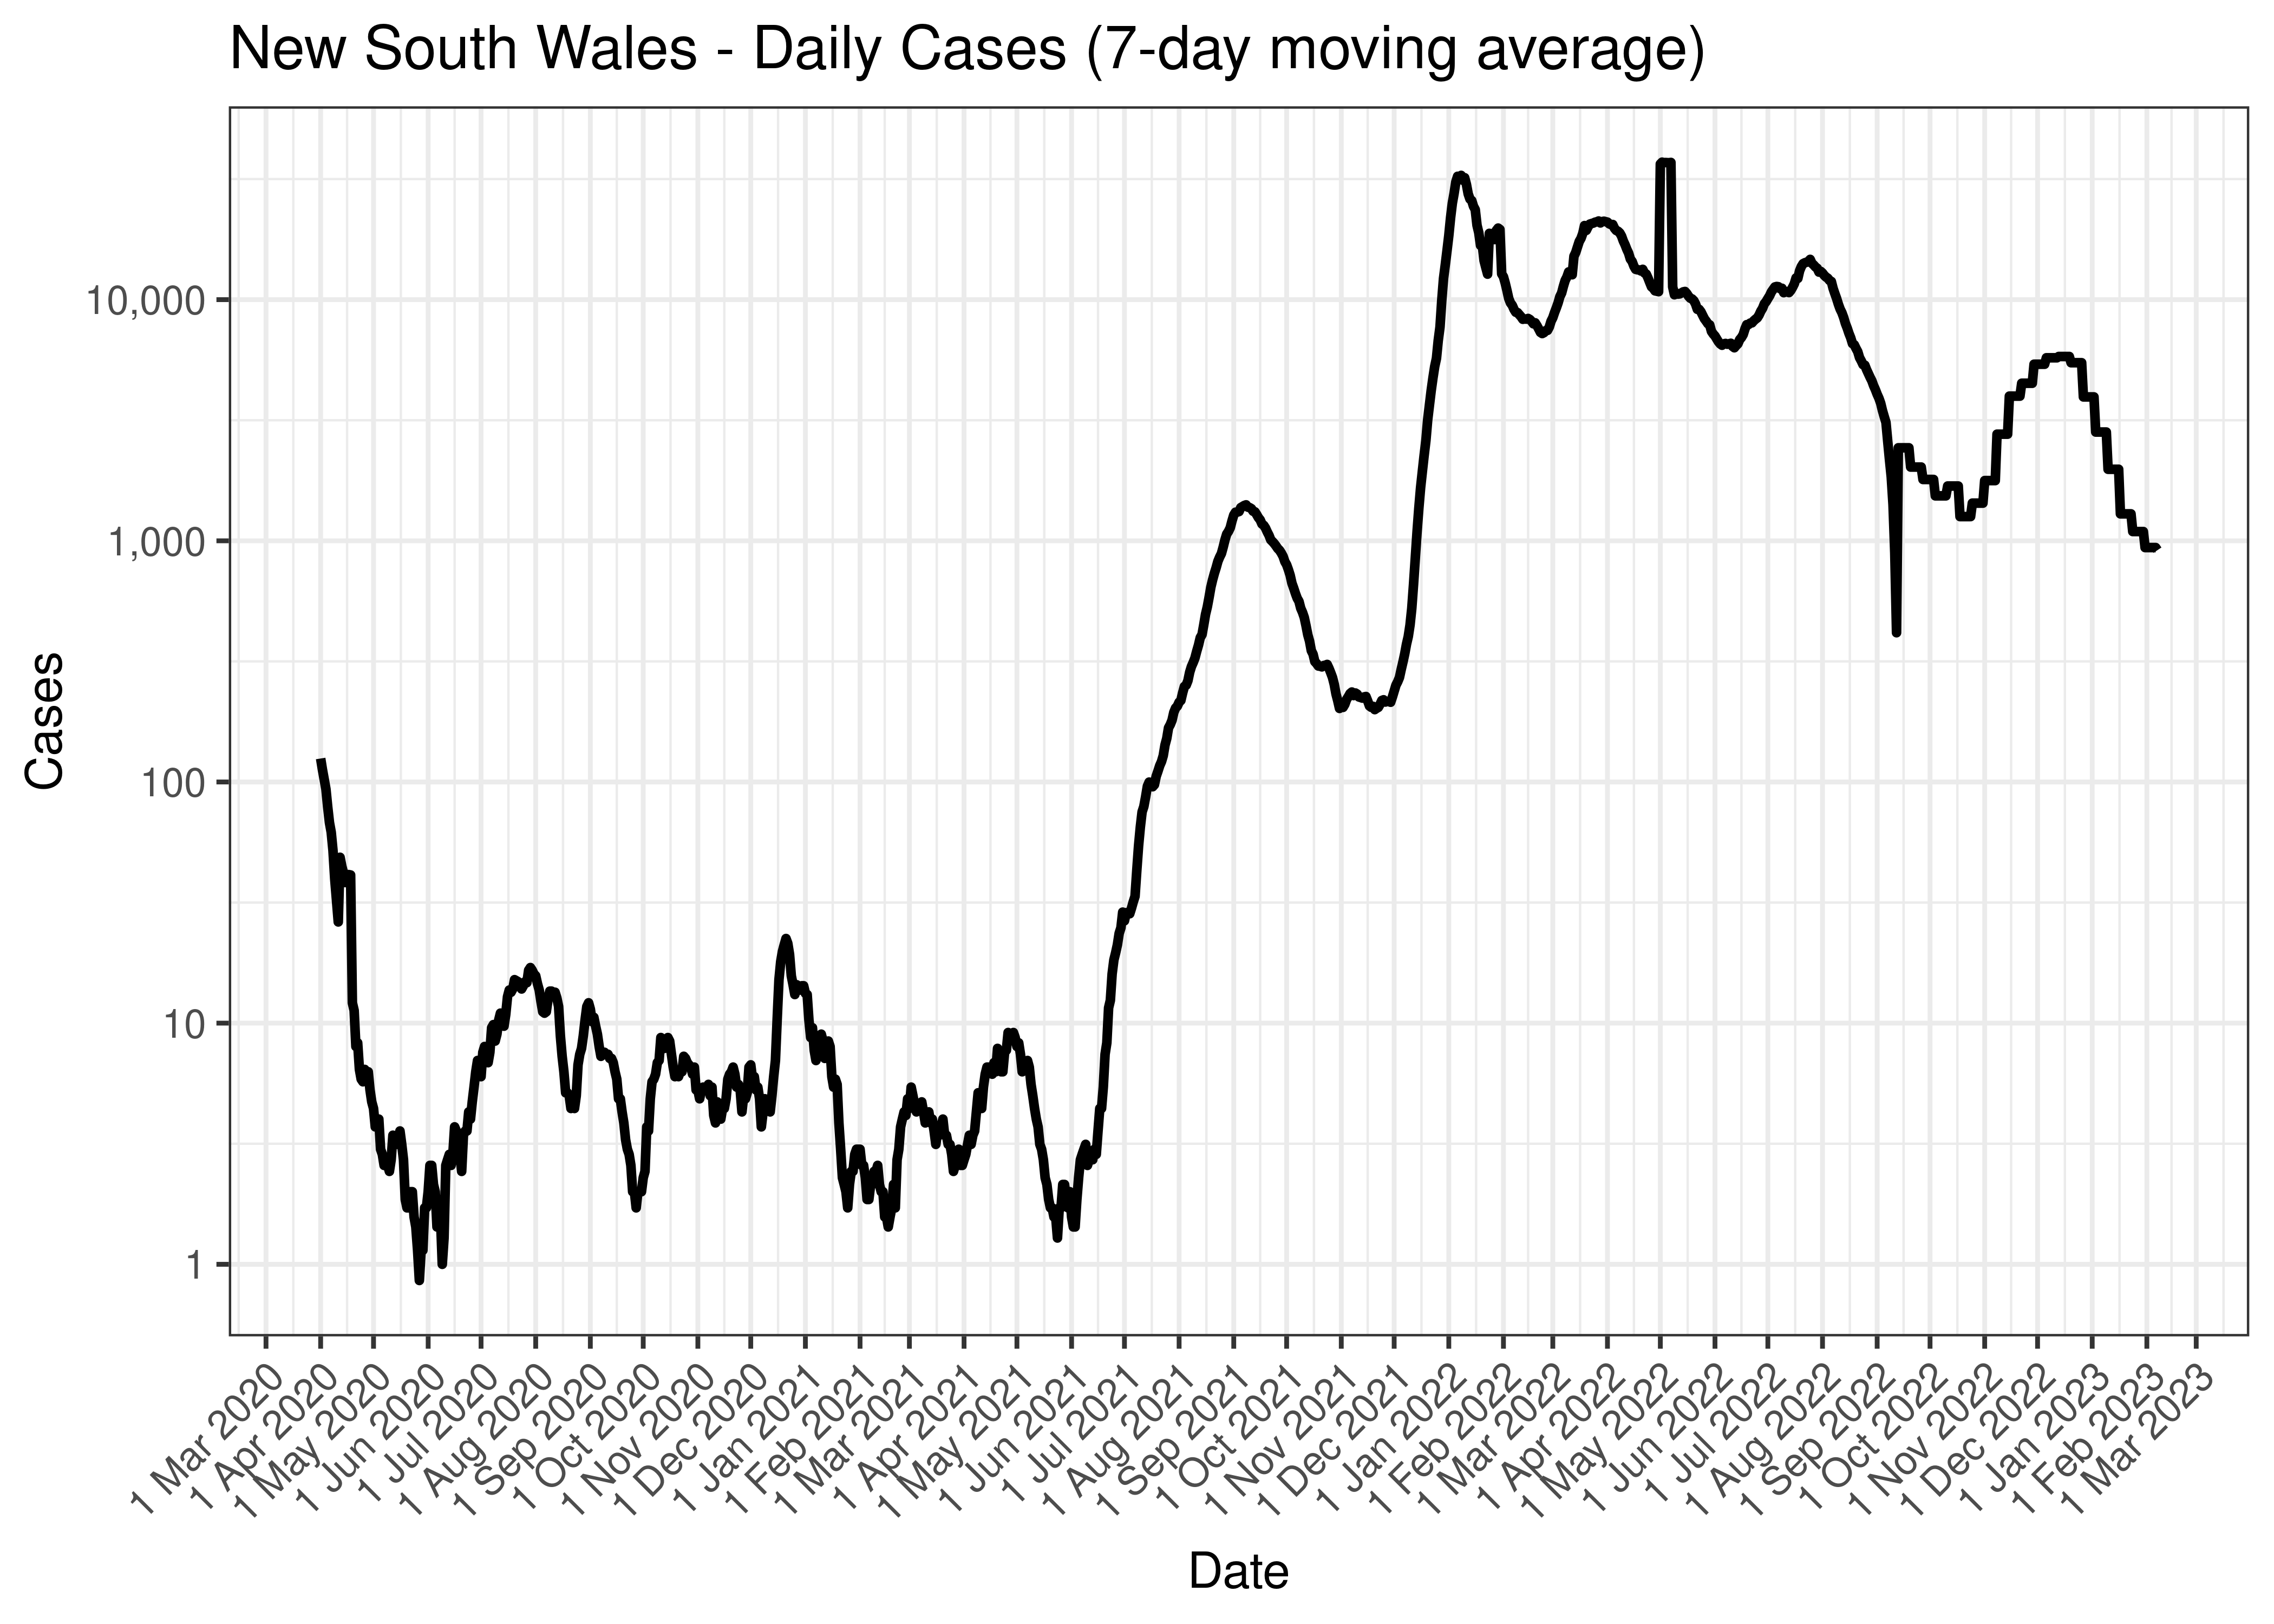 New South Wales - Daily Tests for Last 30 Days (7-day moving average)